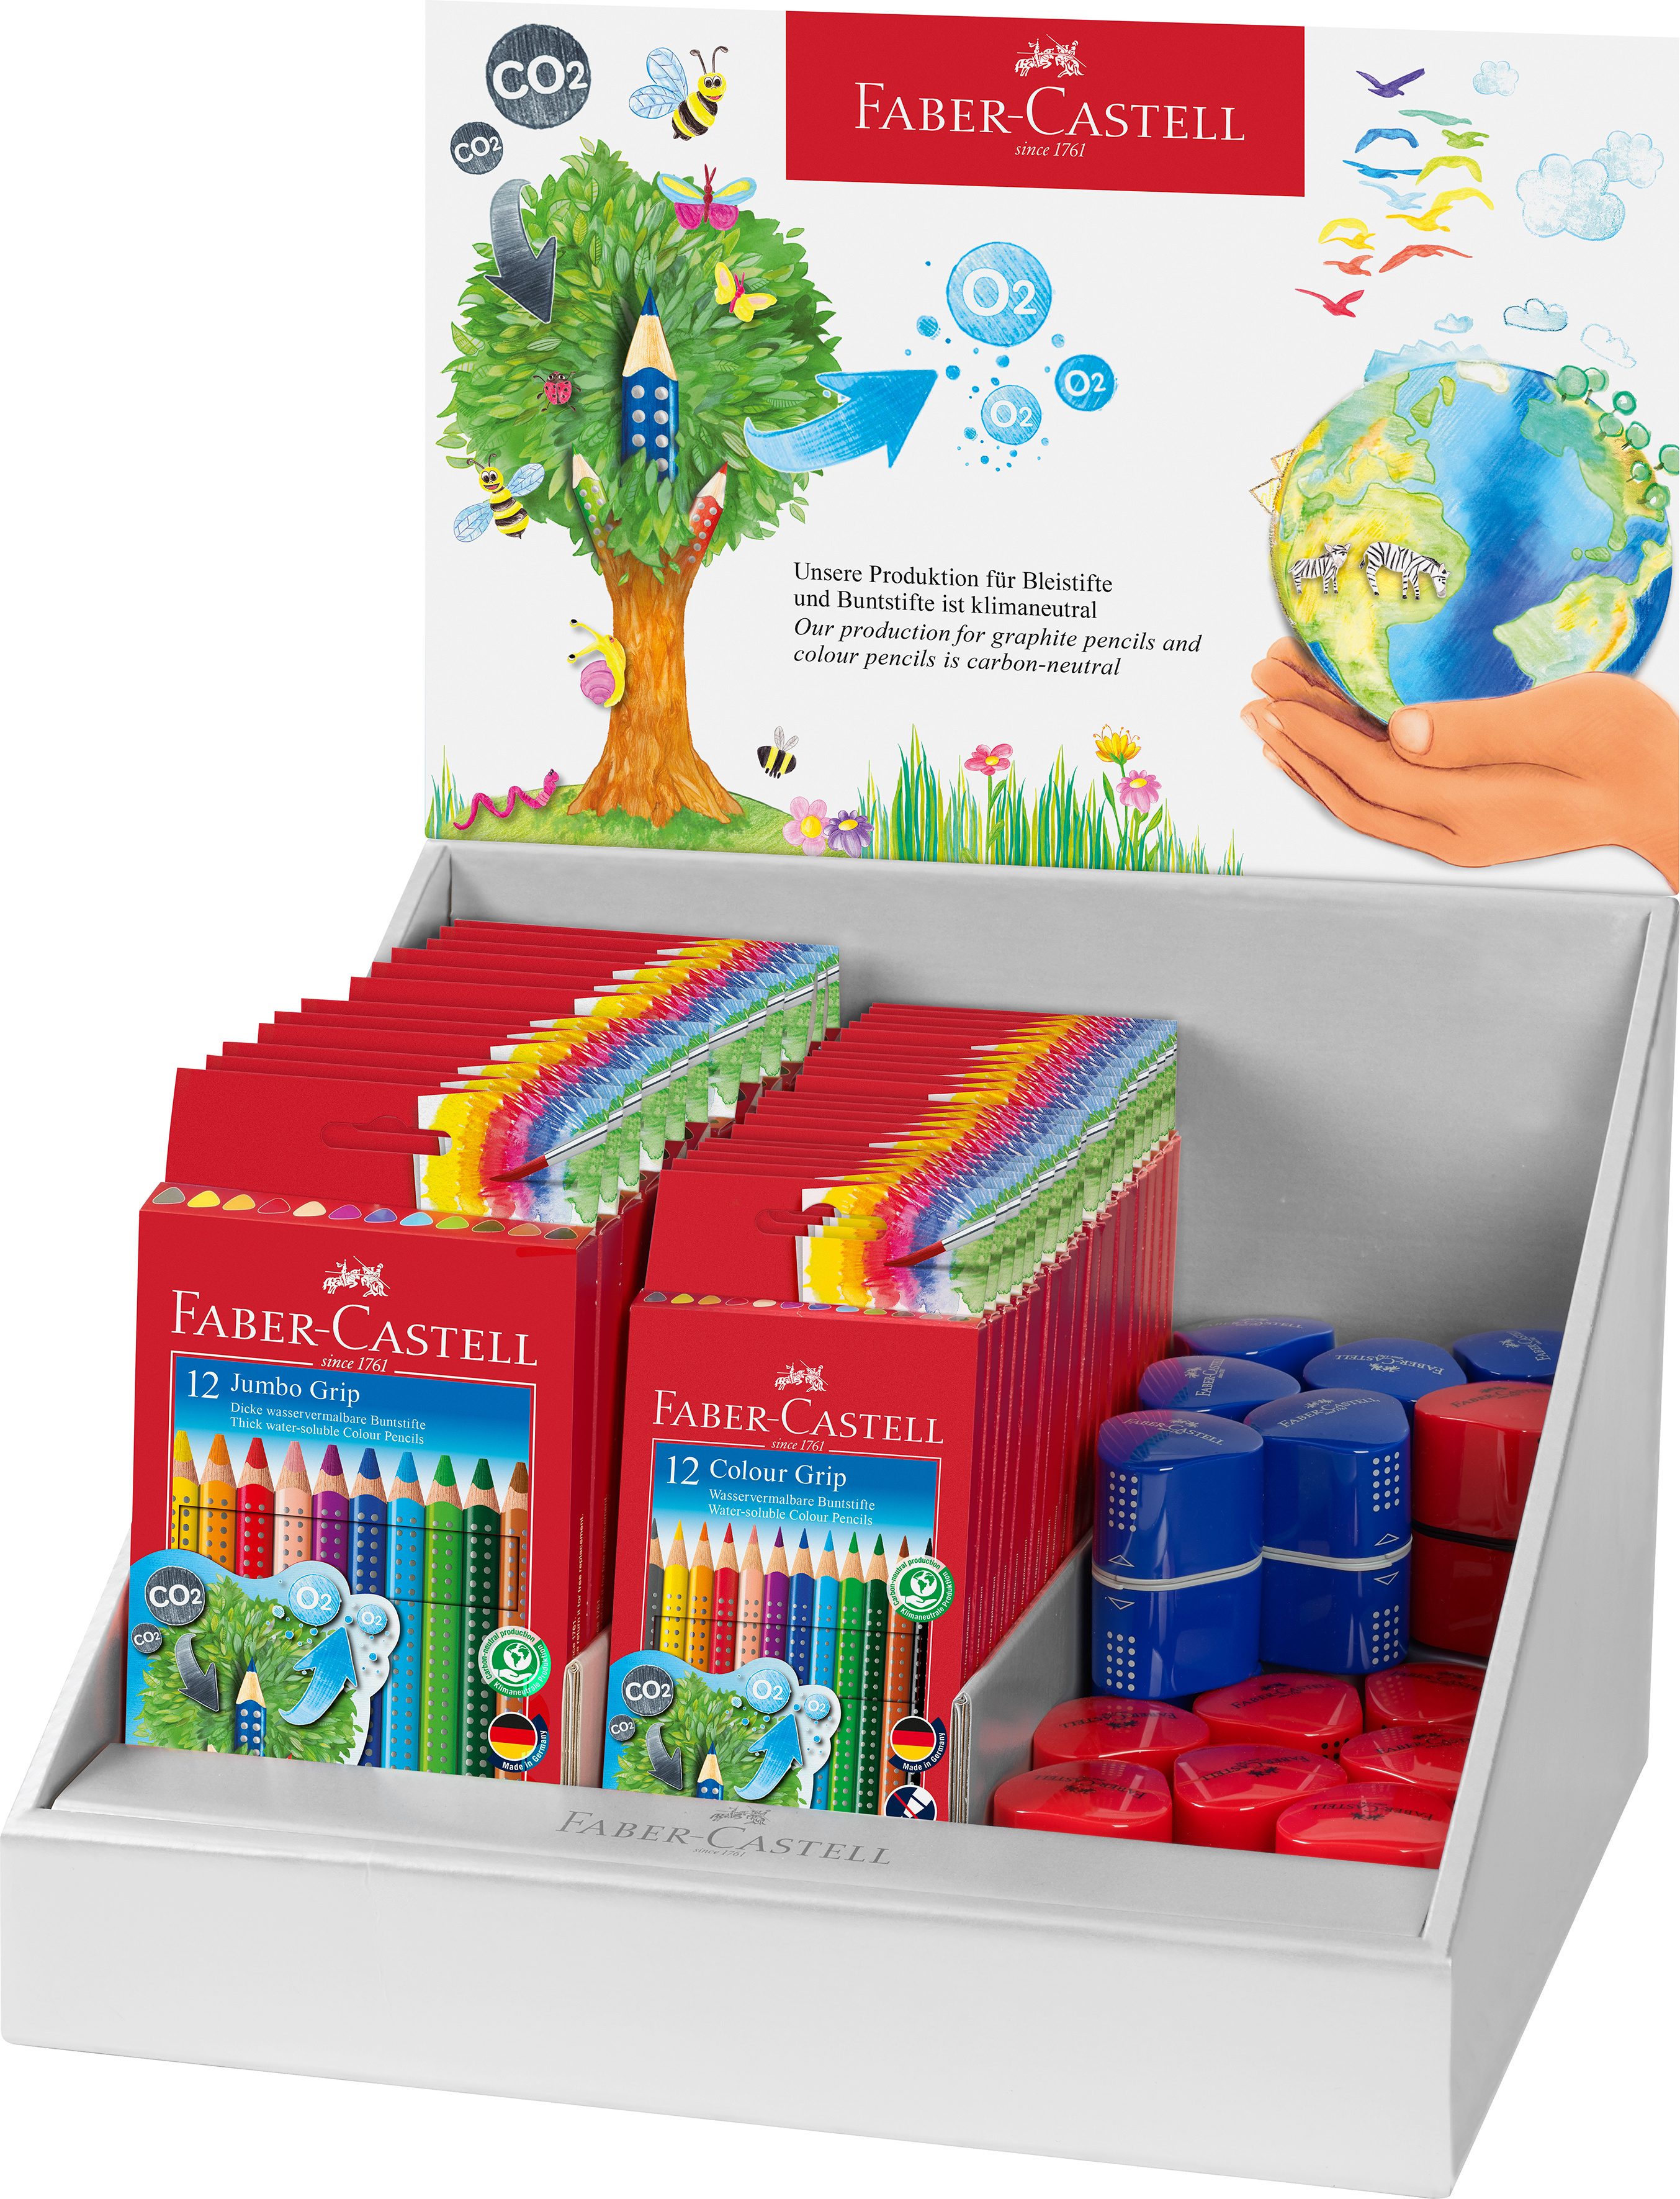 FABER-CASTELL Crayons couleur GRIP 201837 Family Display, 52 pcs.